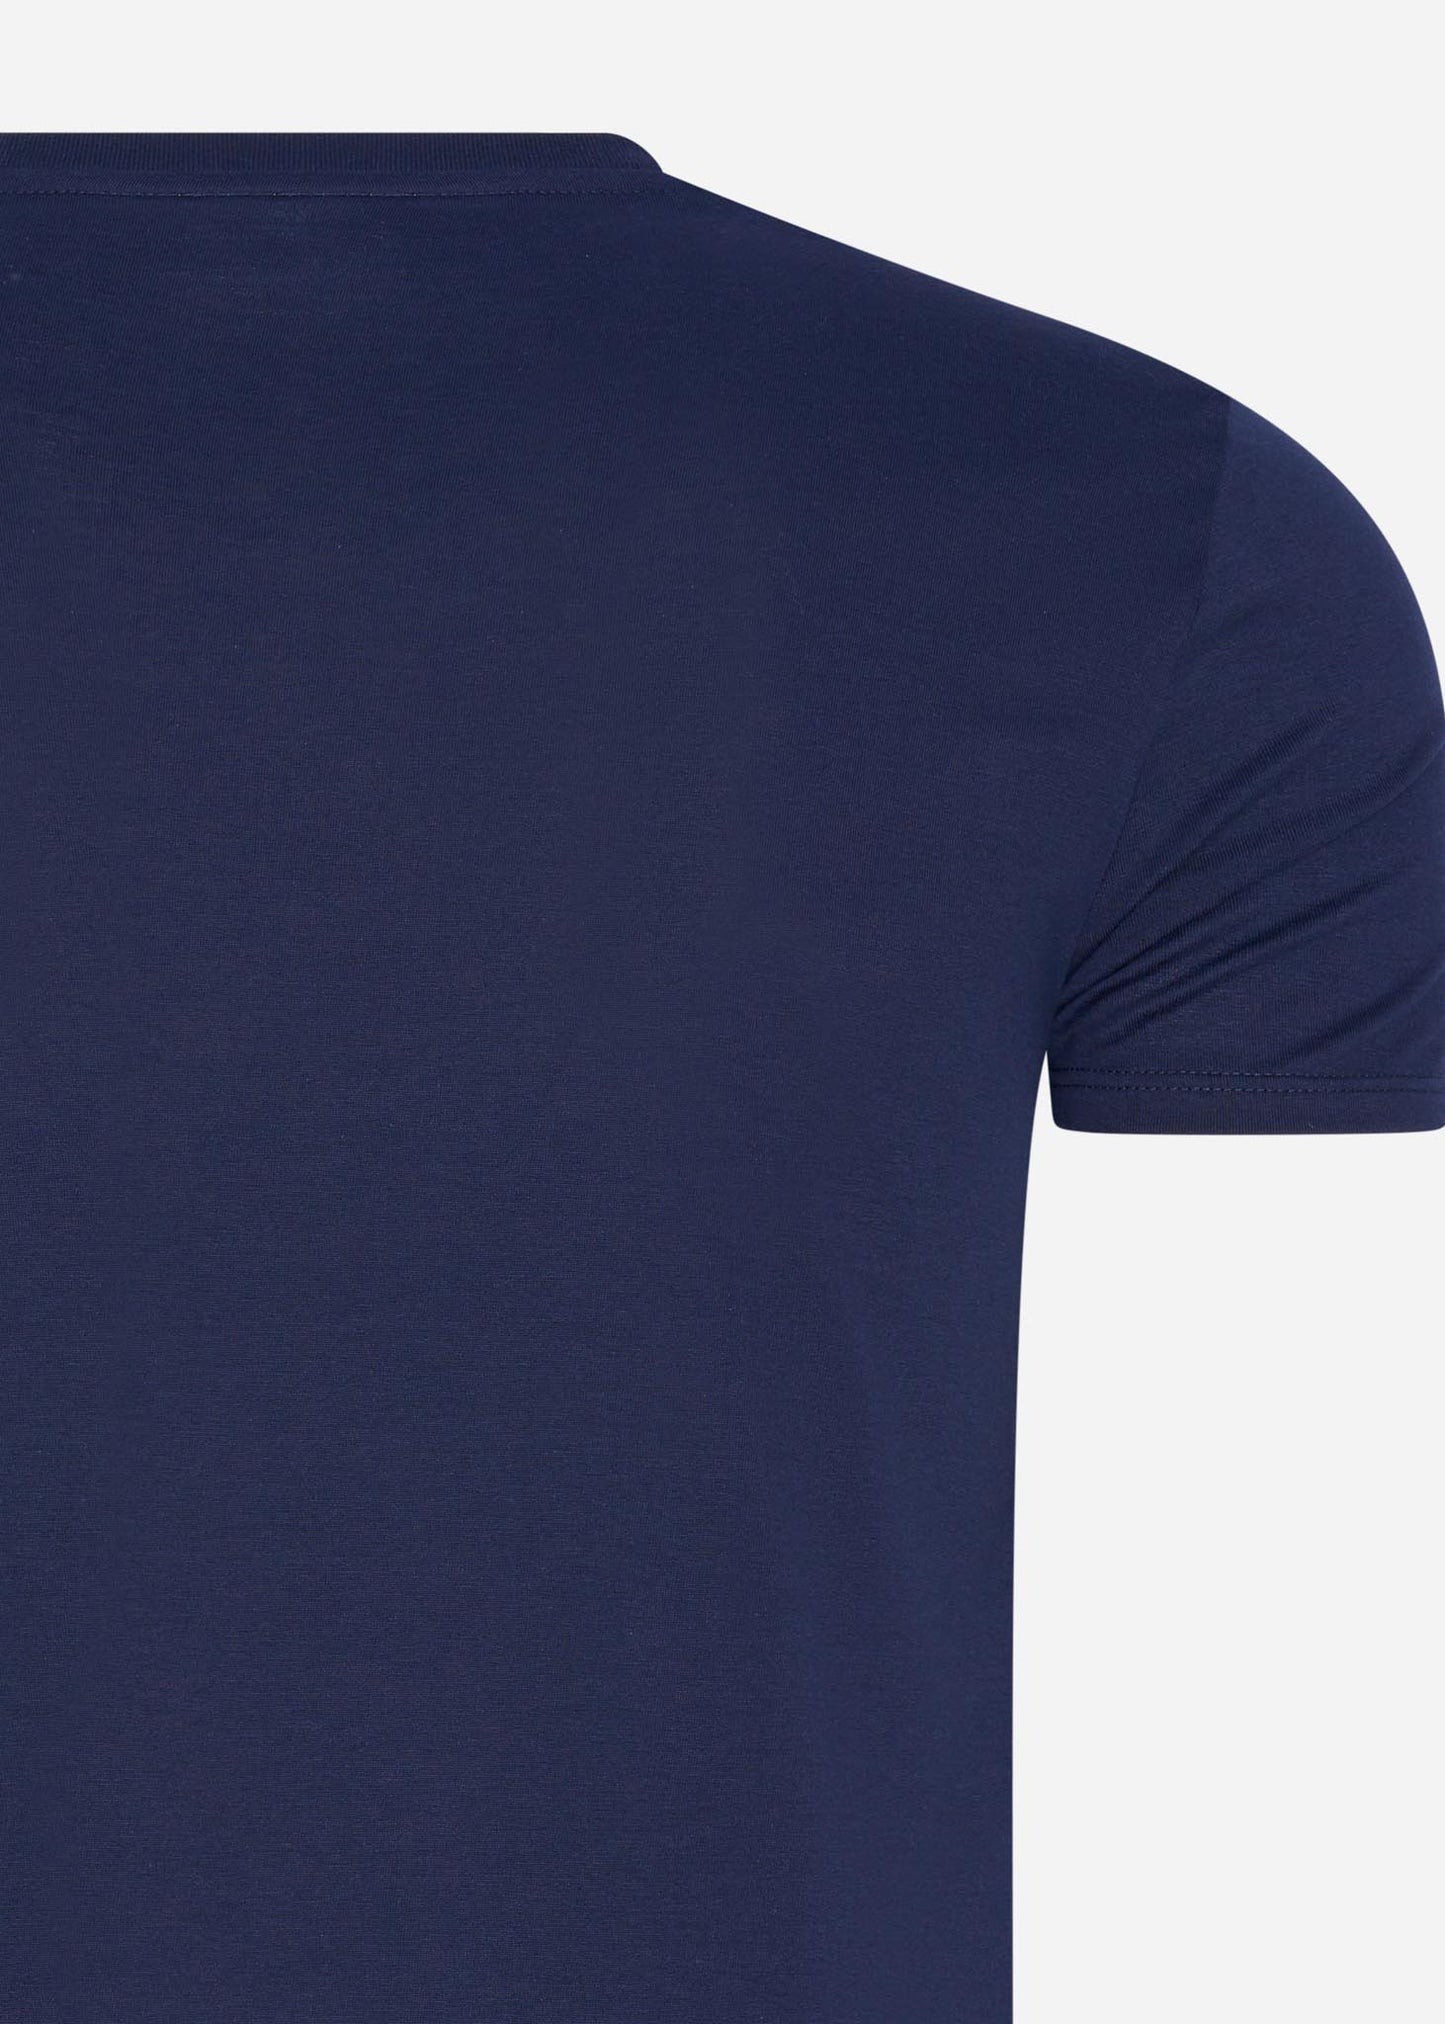 lacoste t-shirt navy